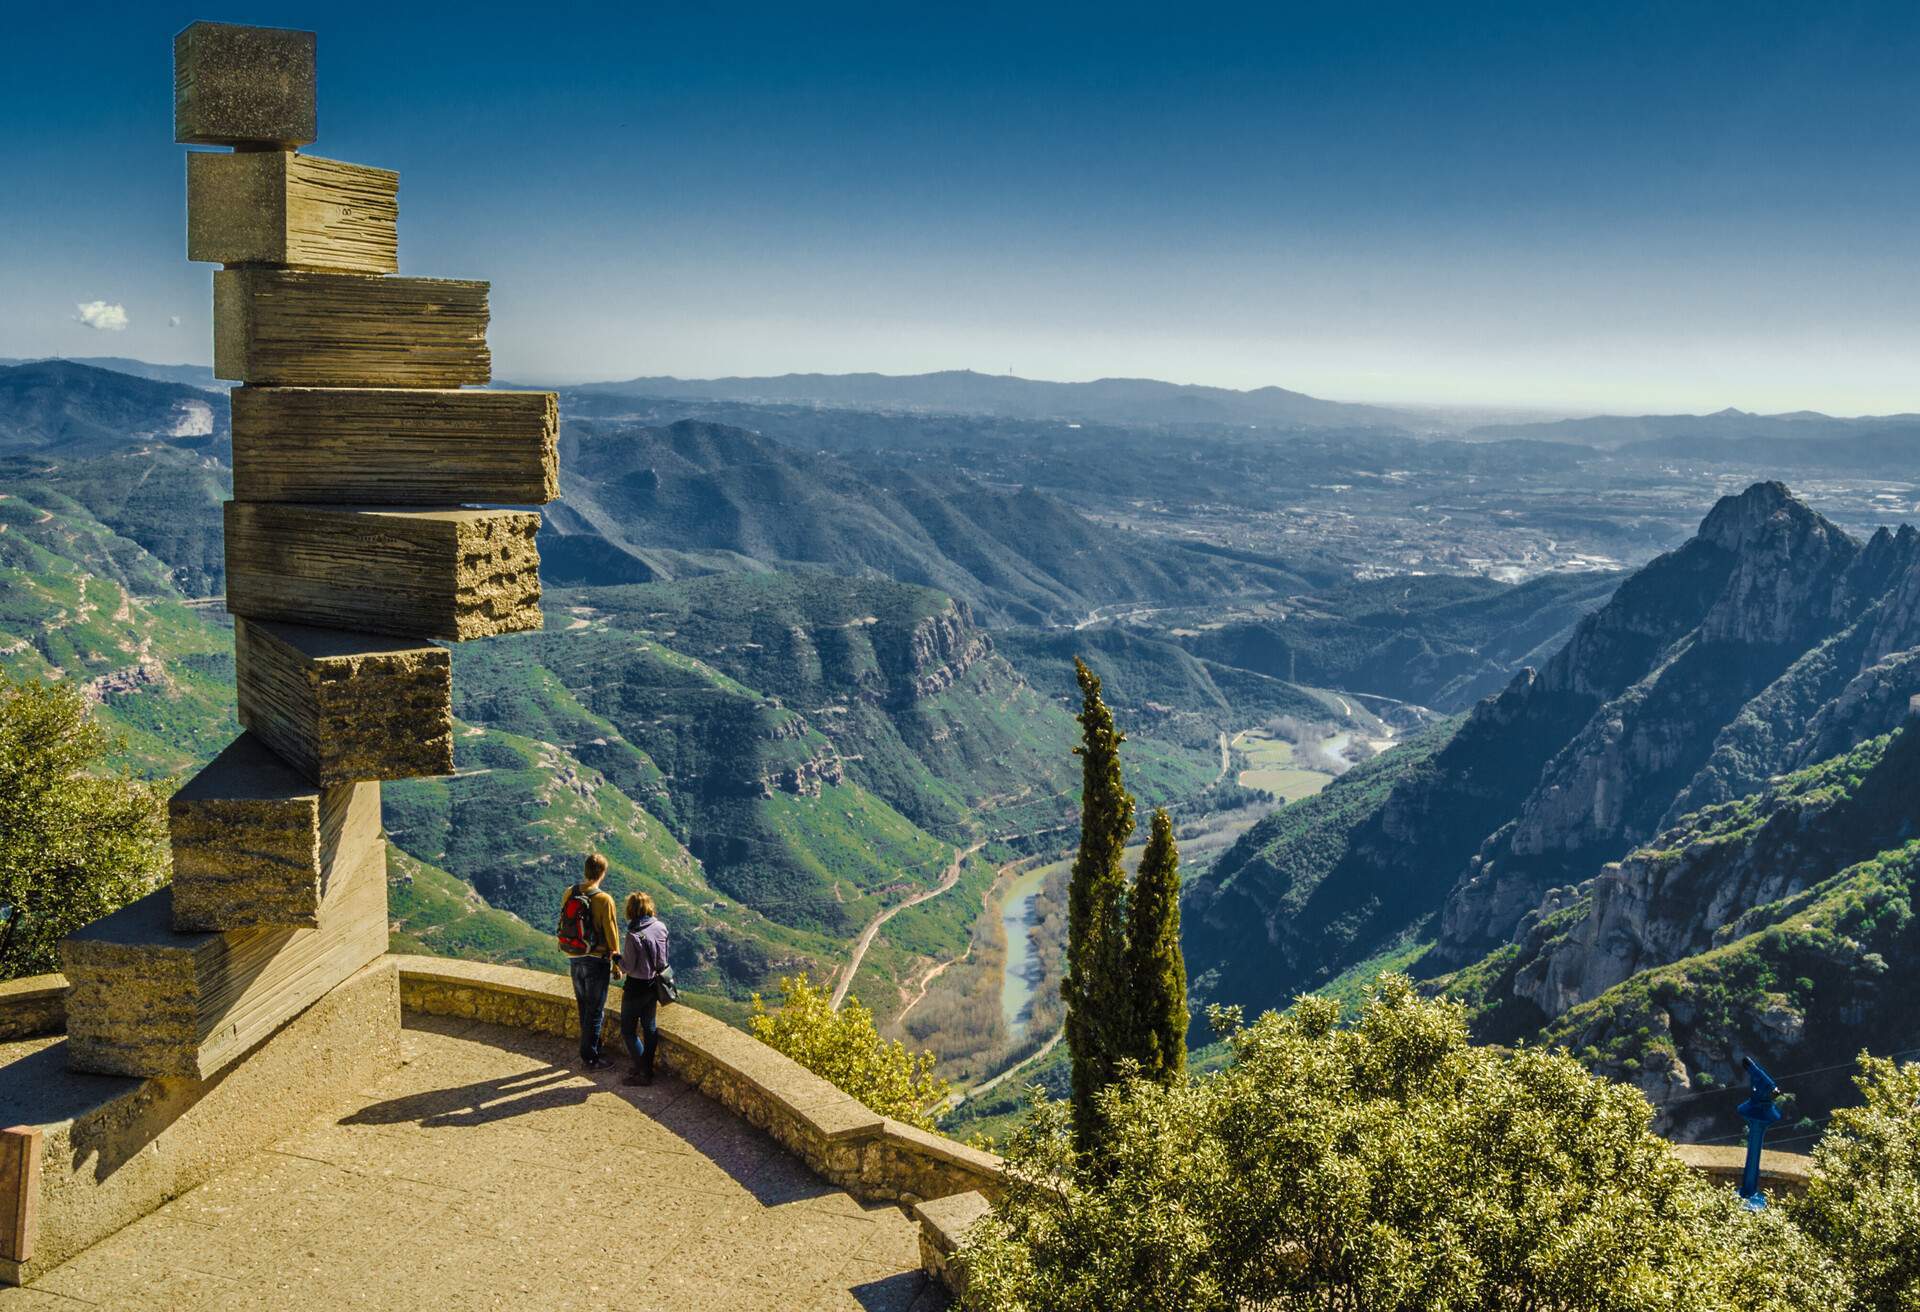 Two people standing on the ledge viewing the mountains with spiral steps of rectangular blocks behind them.